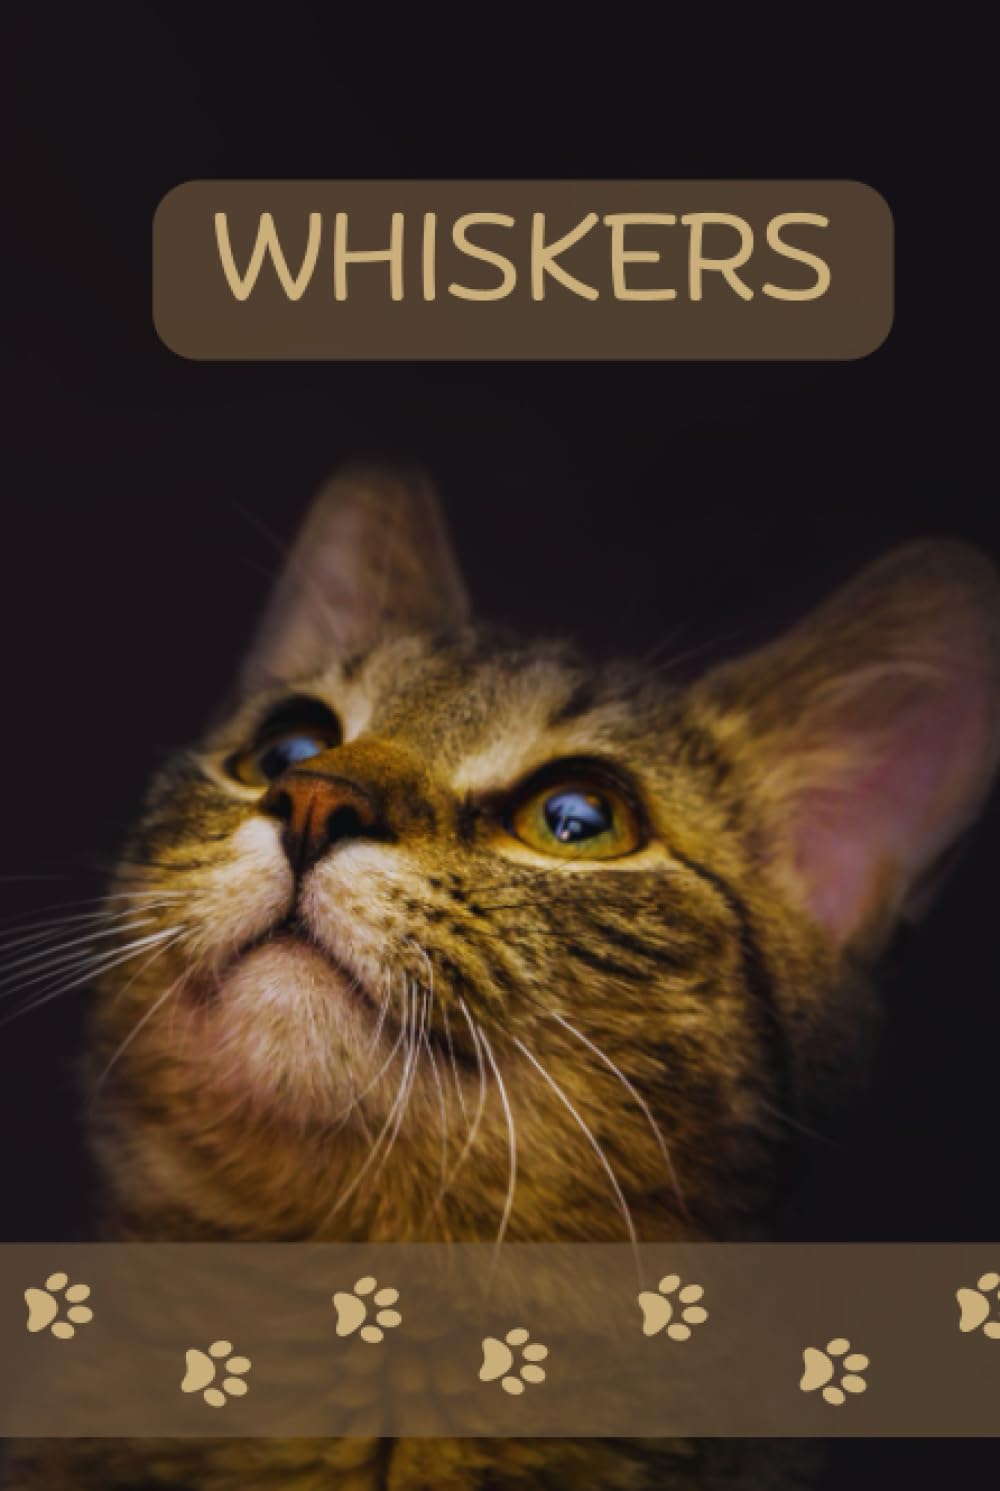 WHISKERS